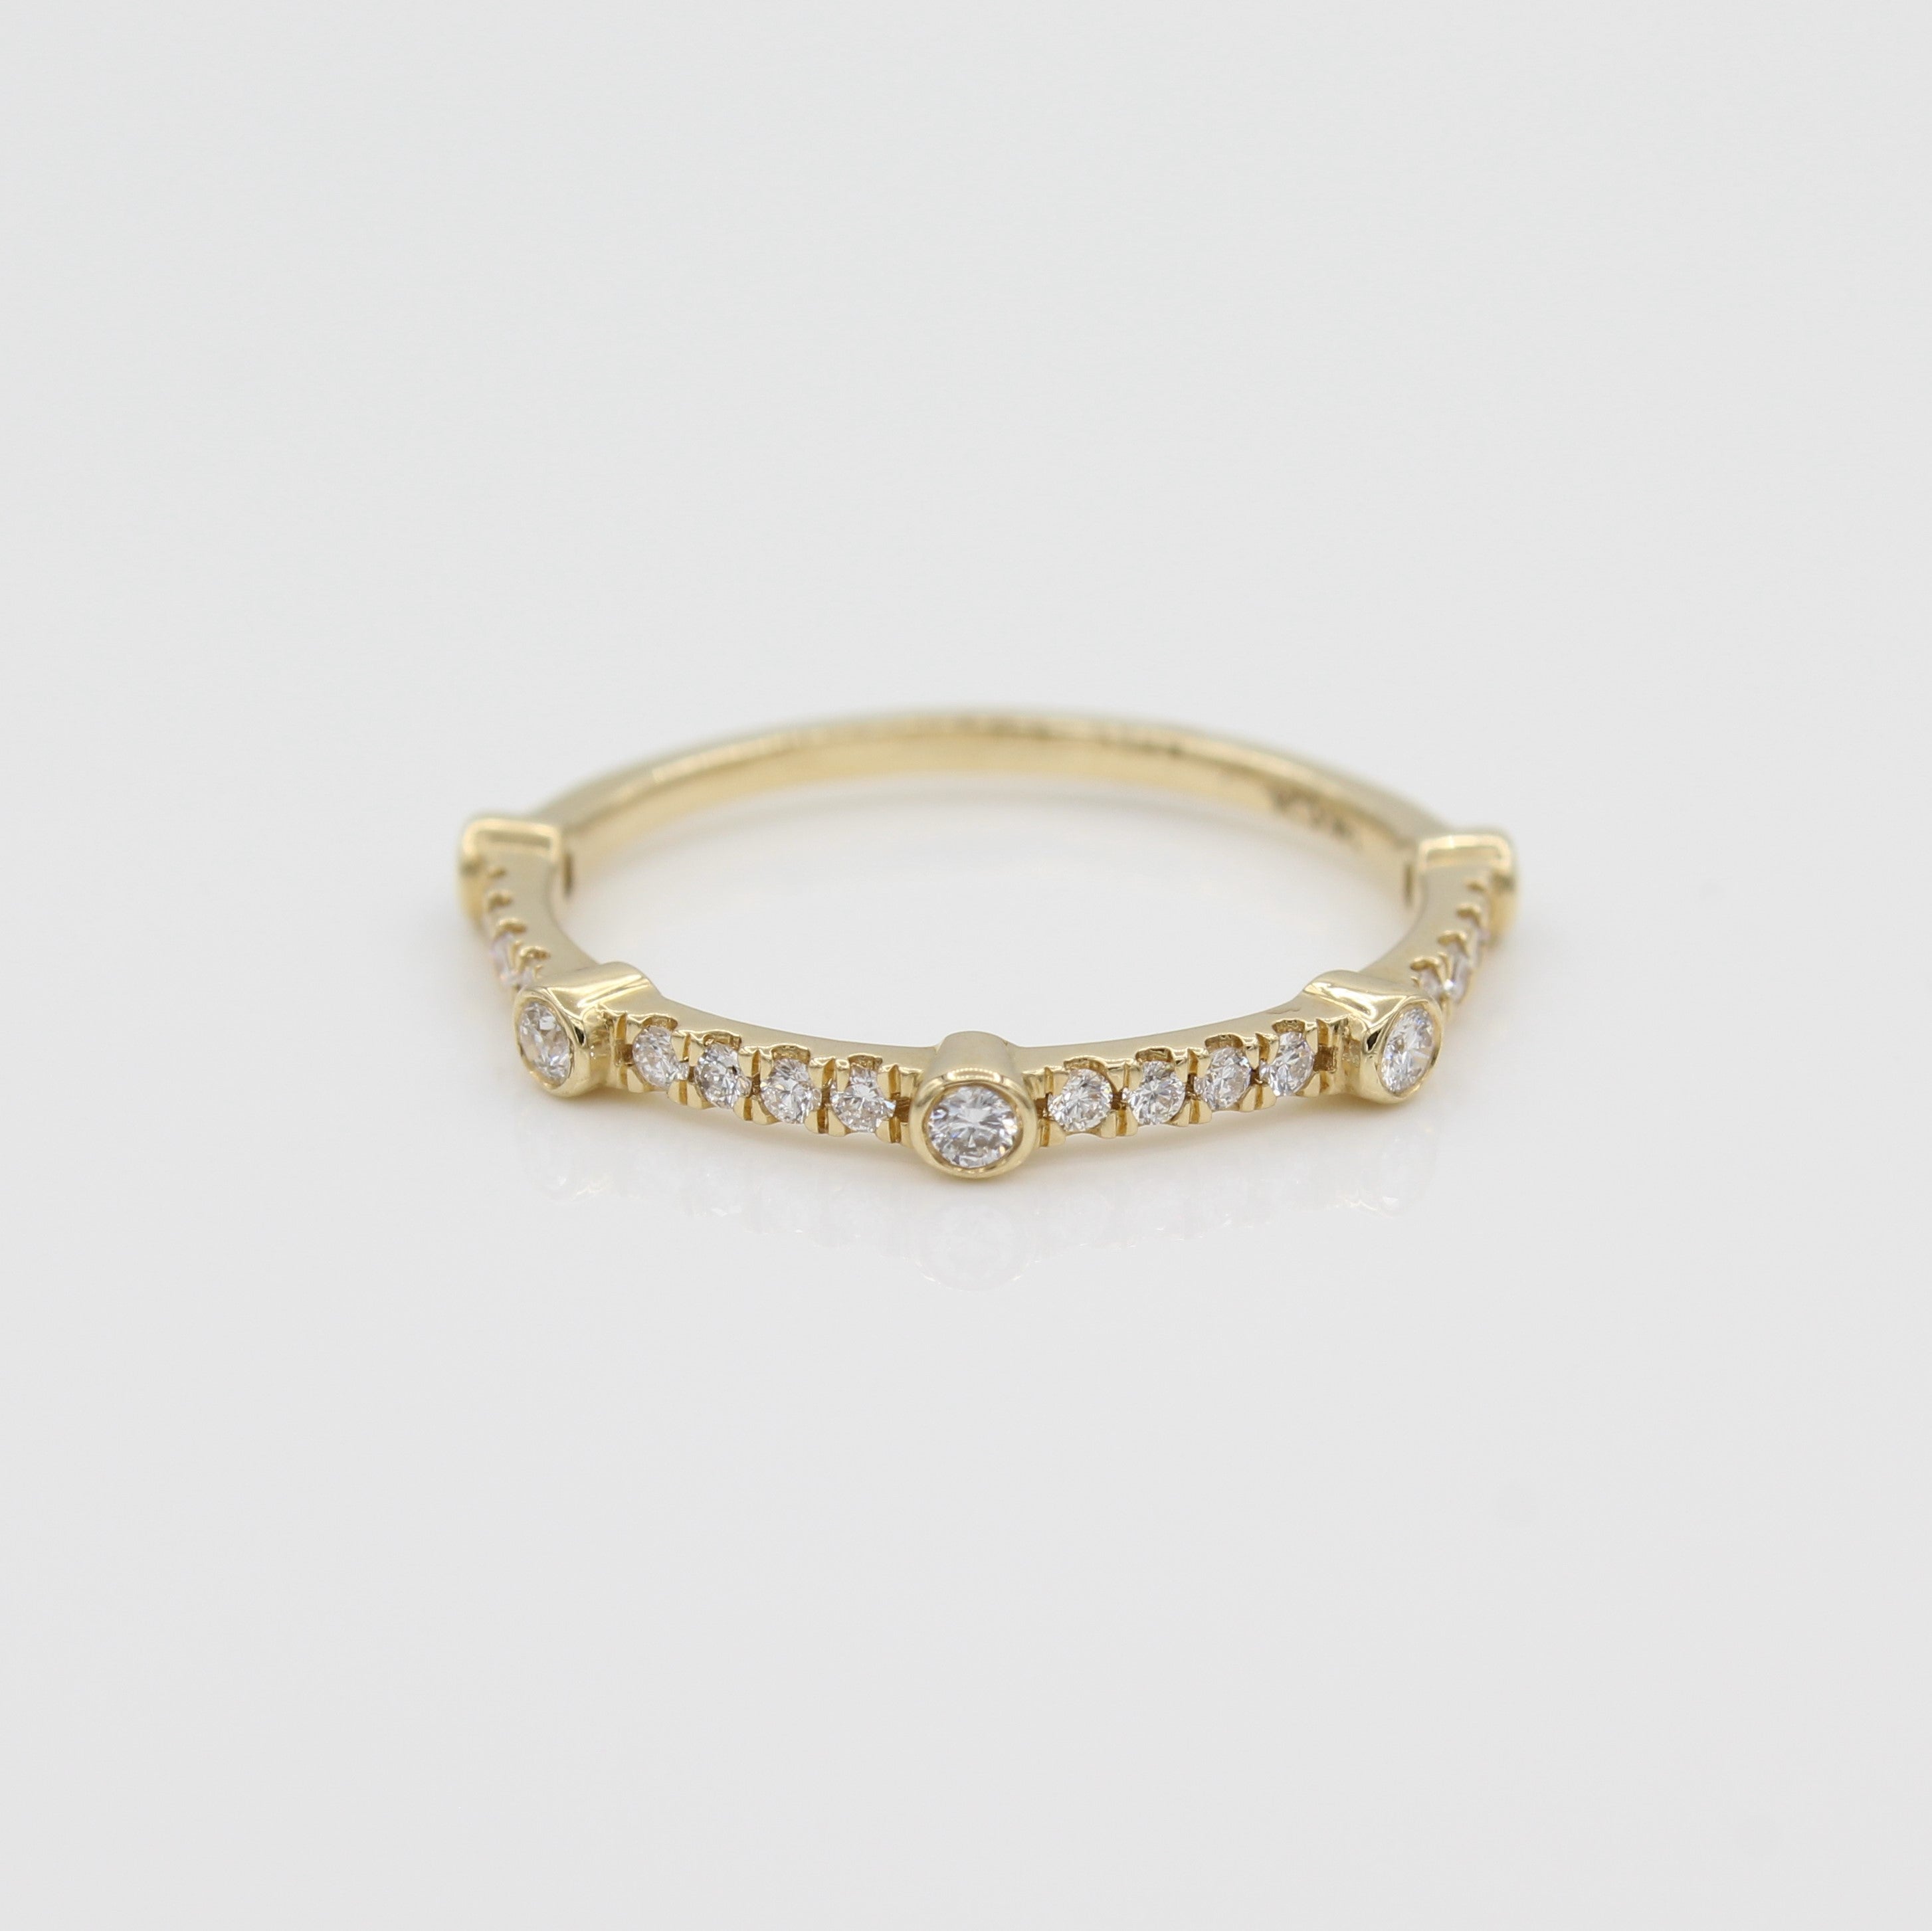 14k Yellow Gold Bezel-Set Diamond 5 Station Ring with Micro-Pave Band, front view. 